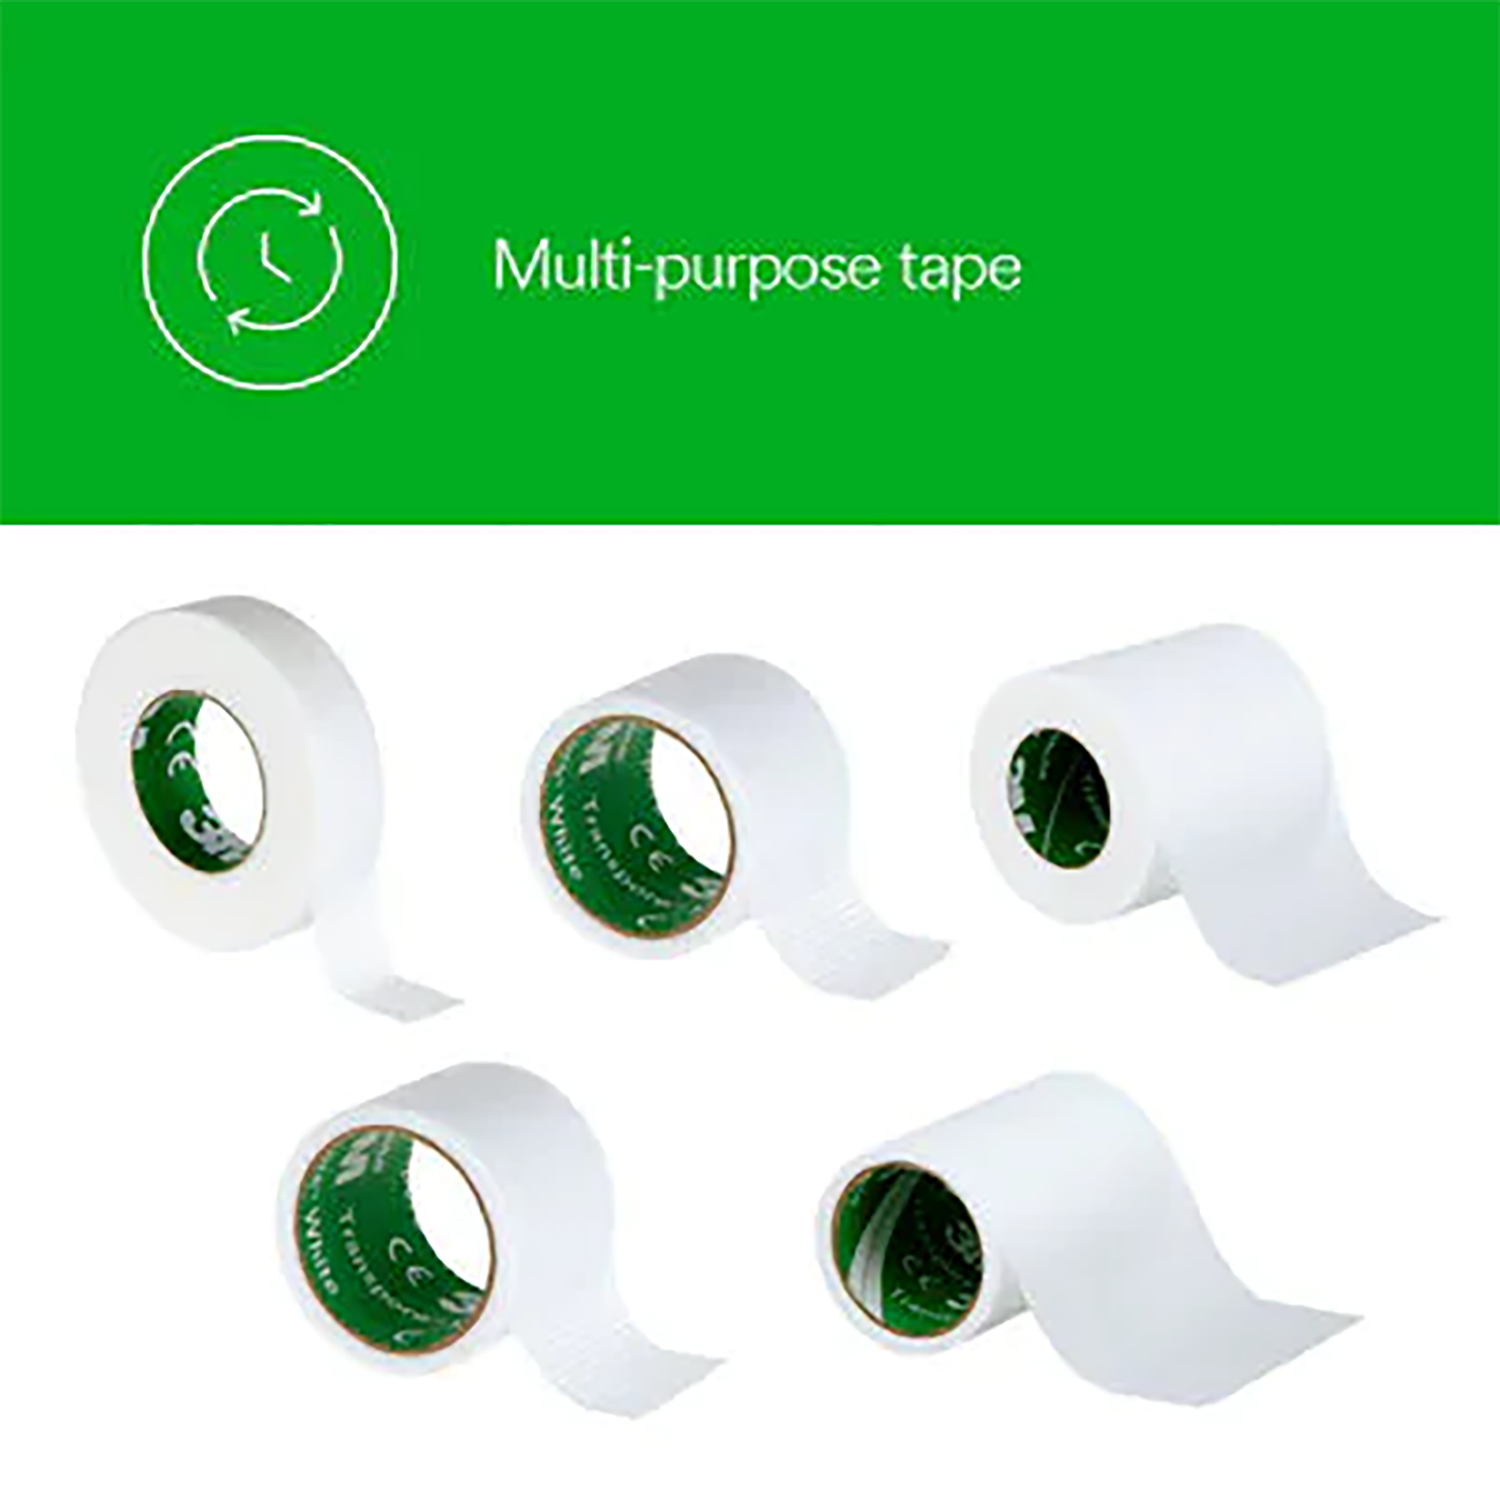 3M Transpore Surgical Tape (White) | 1.25cm x 9.1m | Pack of 24 Rolls (1)